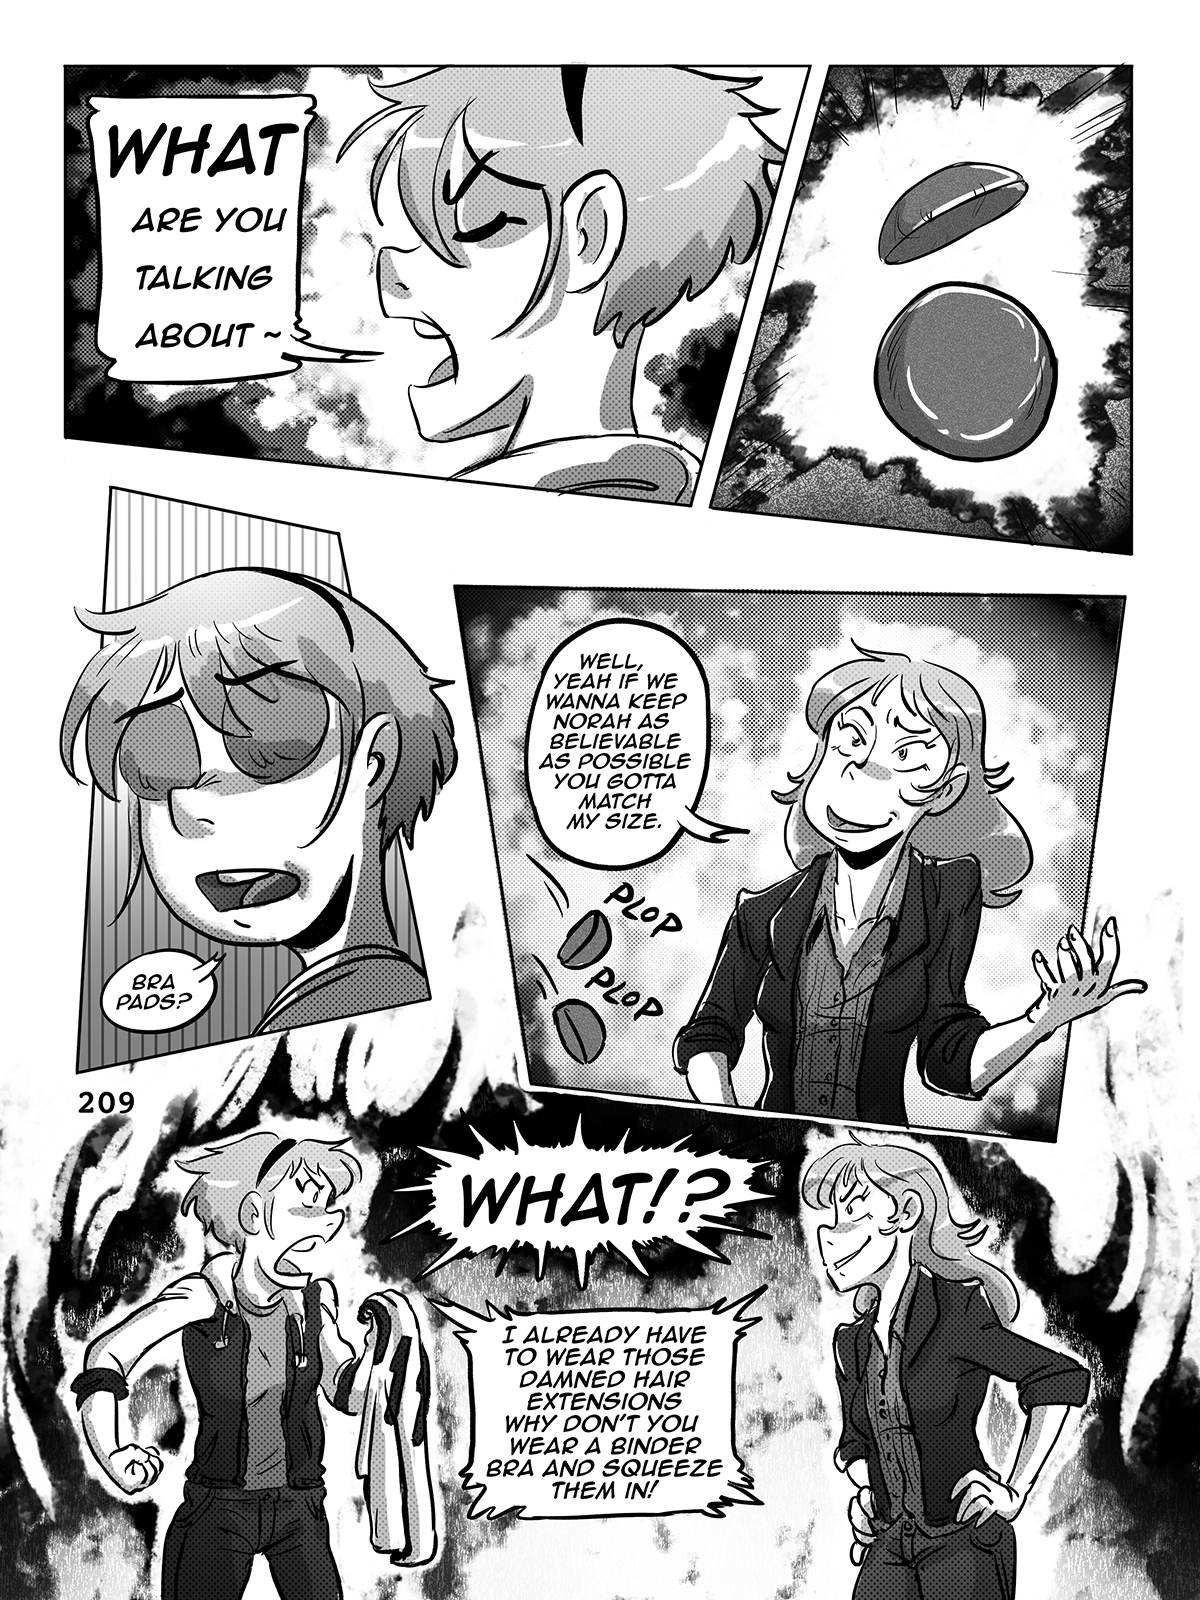 Hockey, Love, & GUTS! – Chapter 8 – Page 209